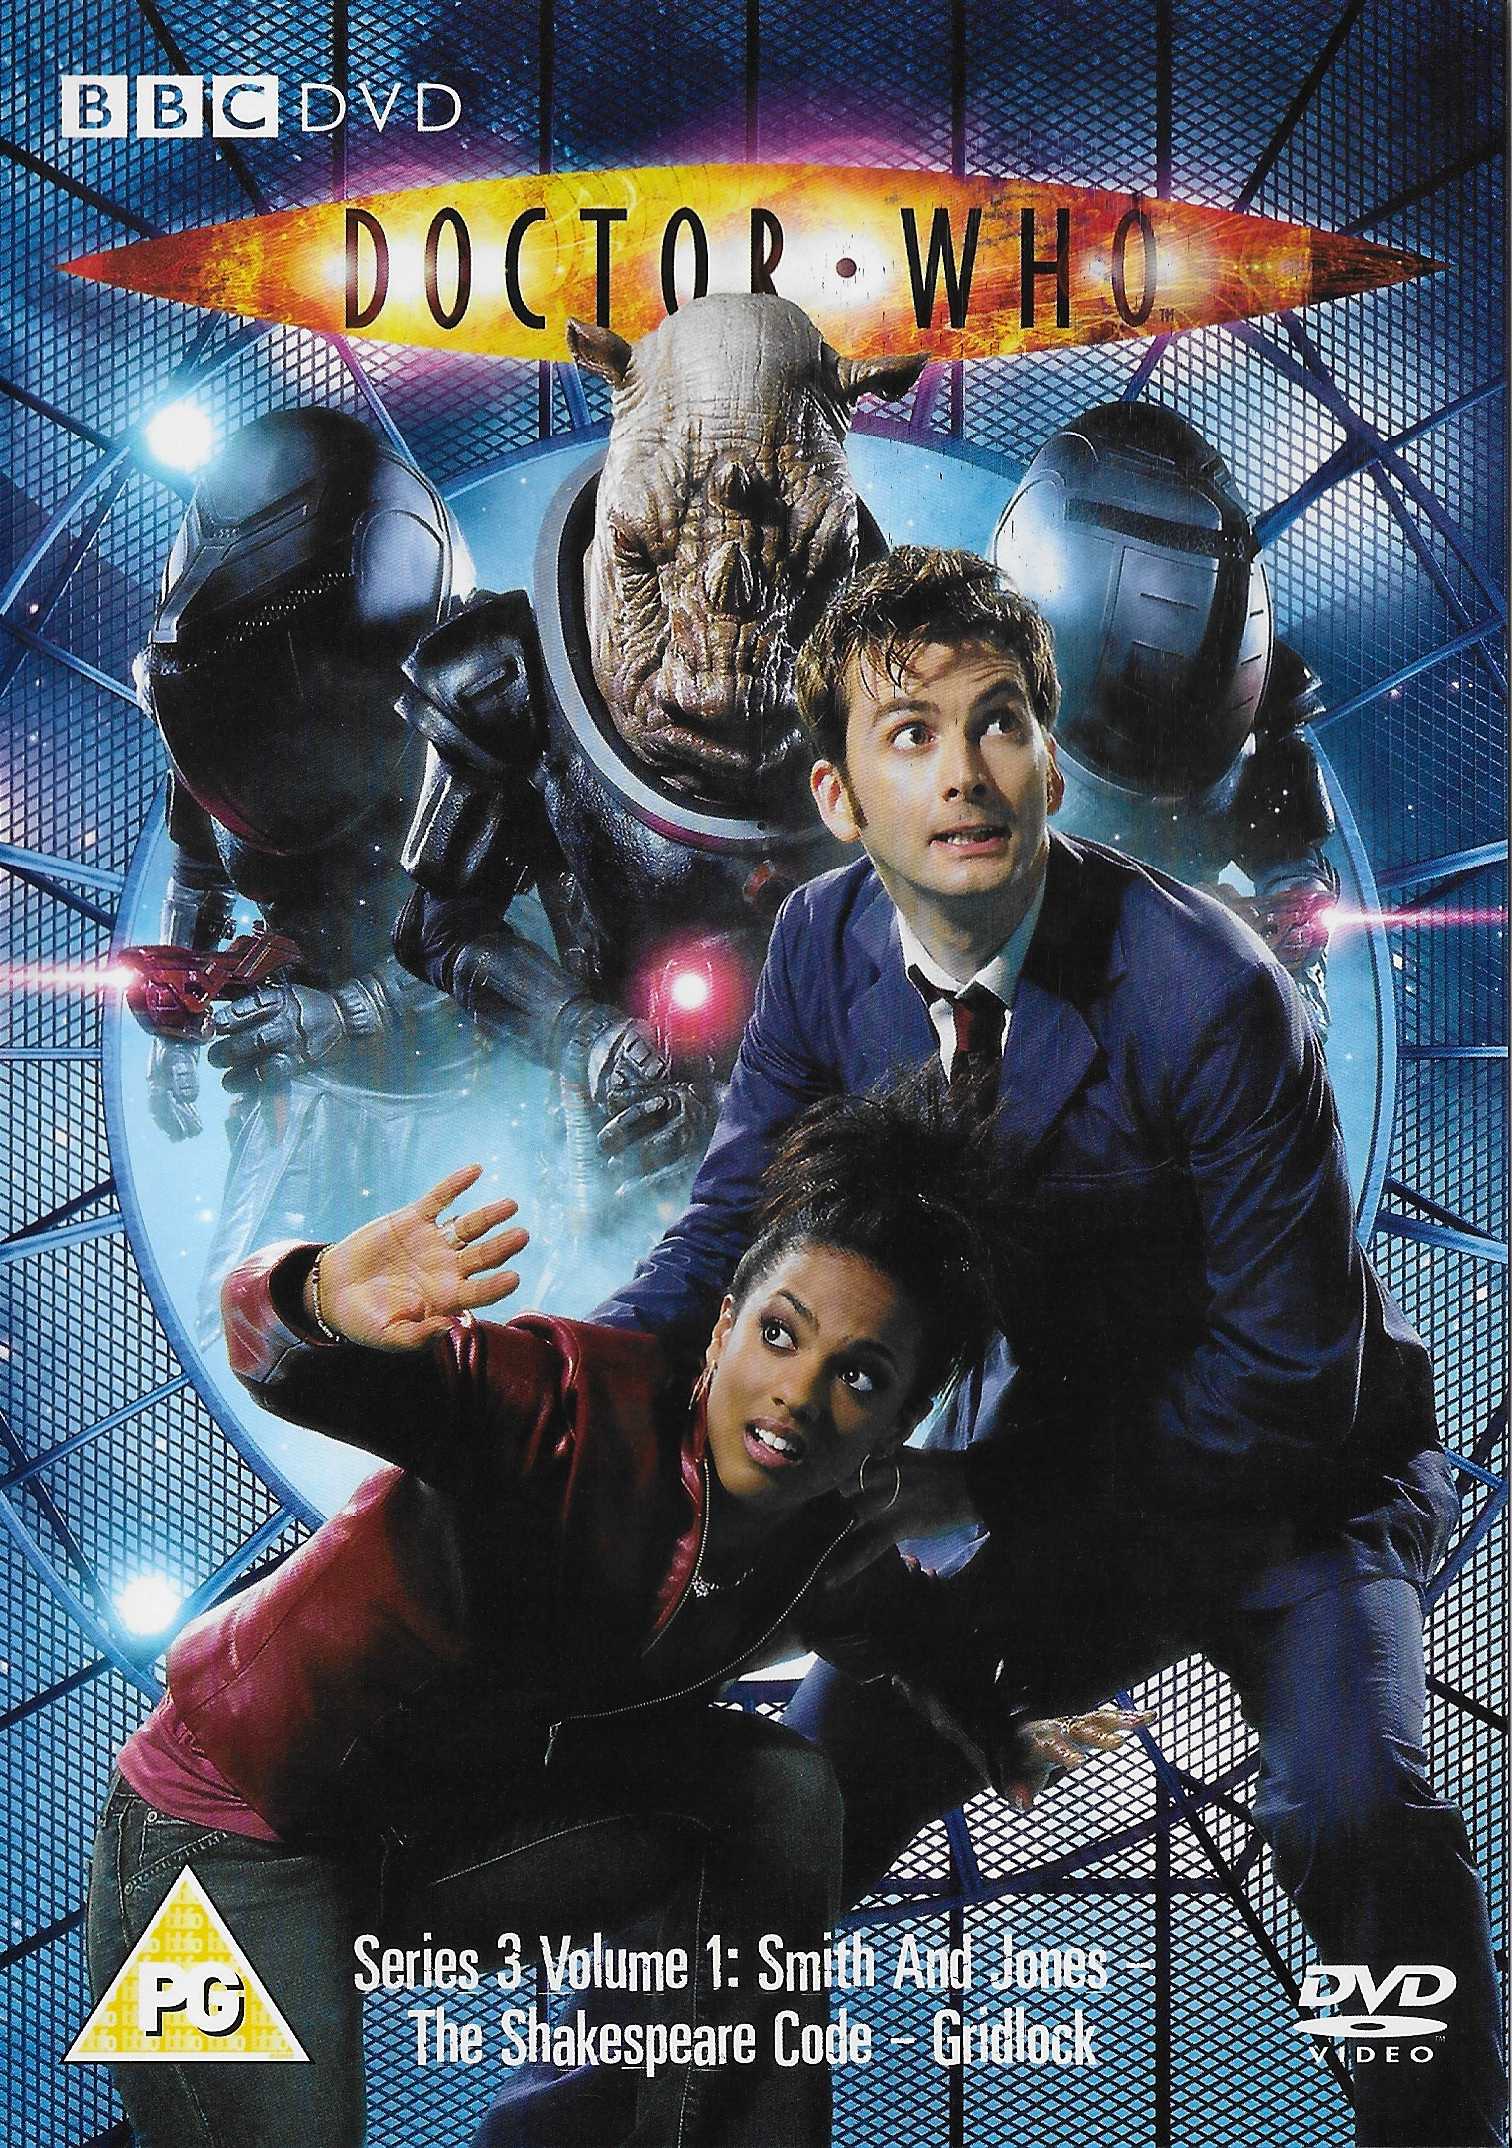 Picture of BBCDVD 2381 Doctor Who - Series 3, volume 1 by artist Russell T Davies / Gareth Roberts from the BBC records and Tapes library